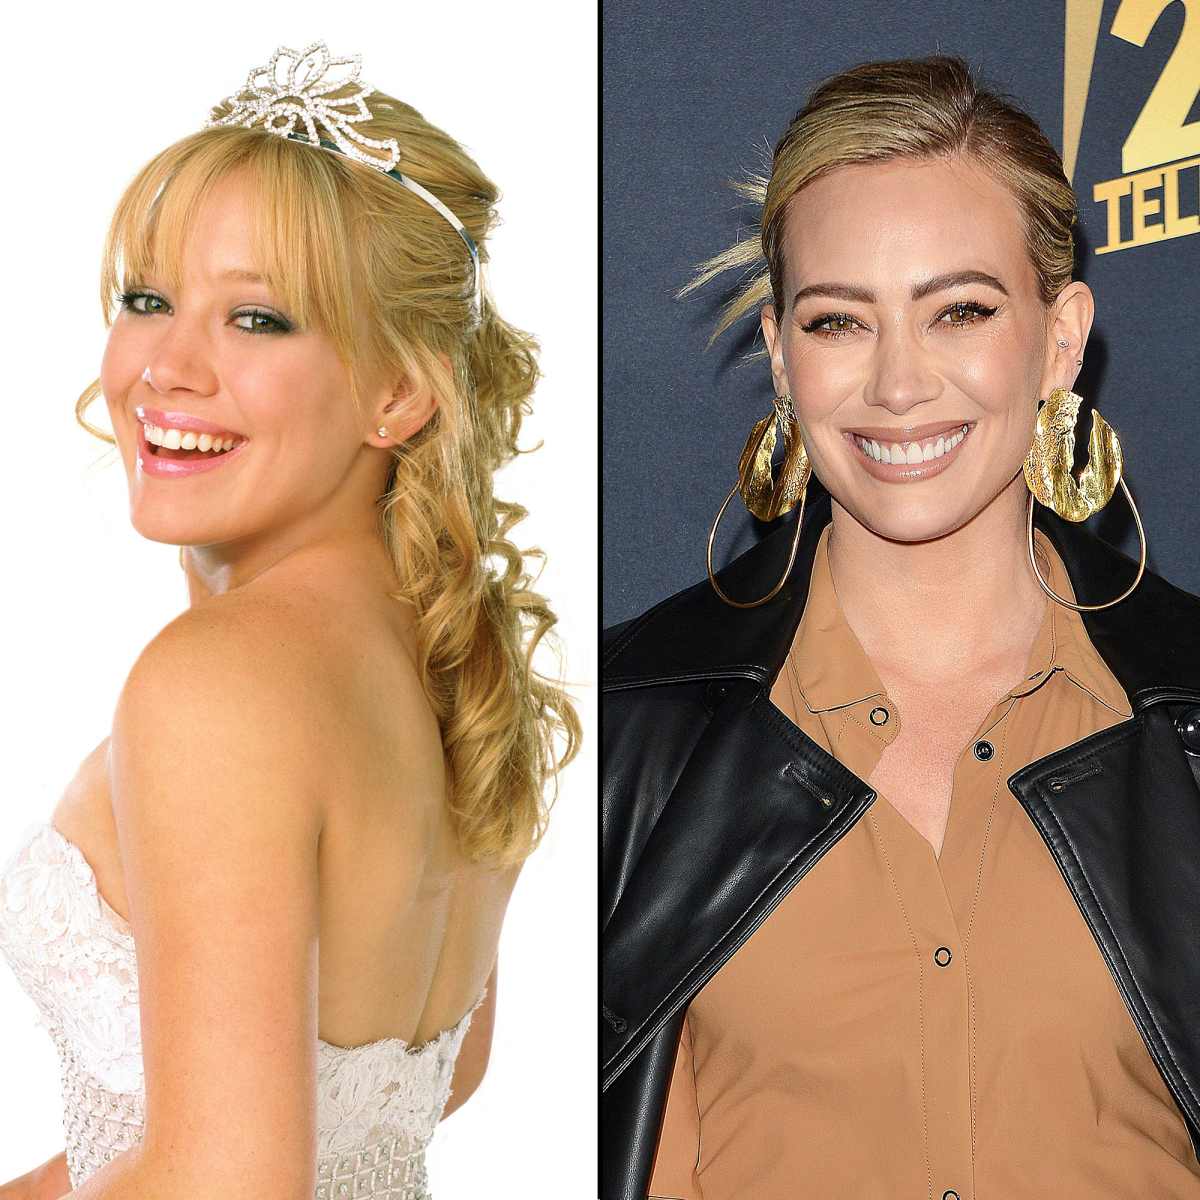 A Cinderella Story' Cast: Where Are They Now?